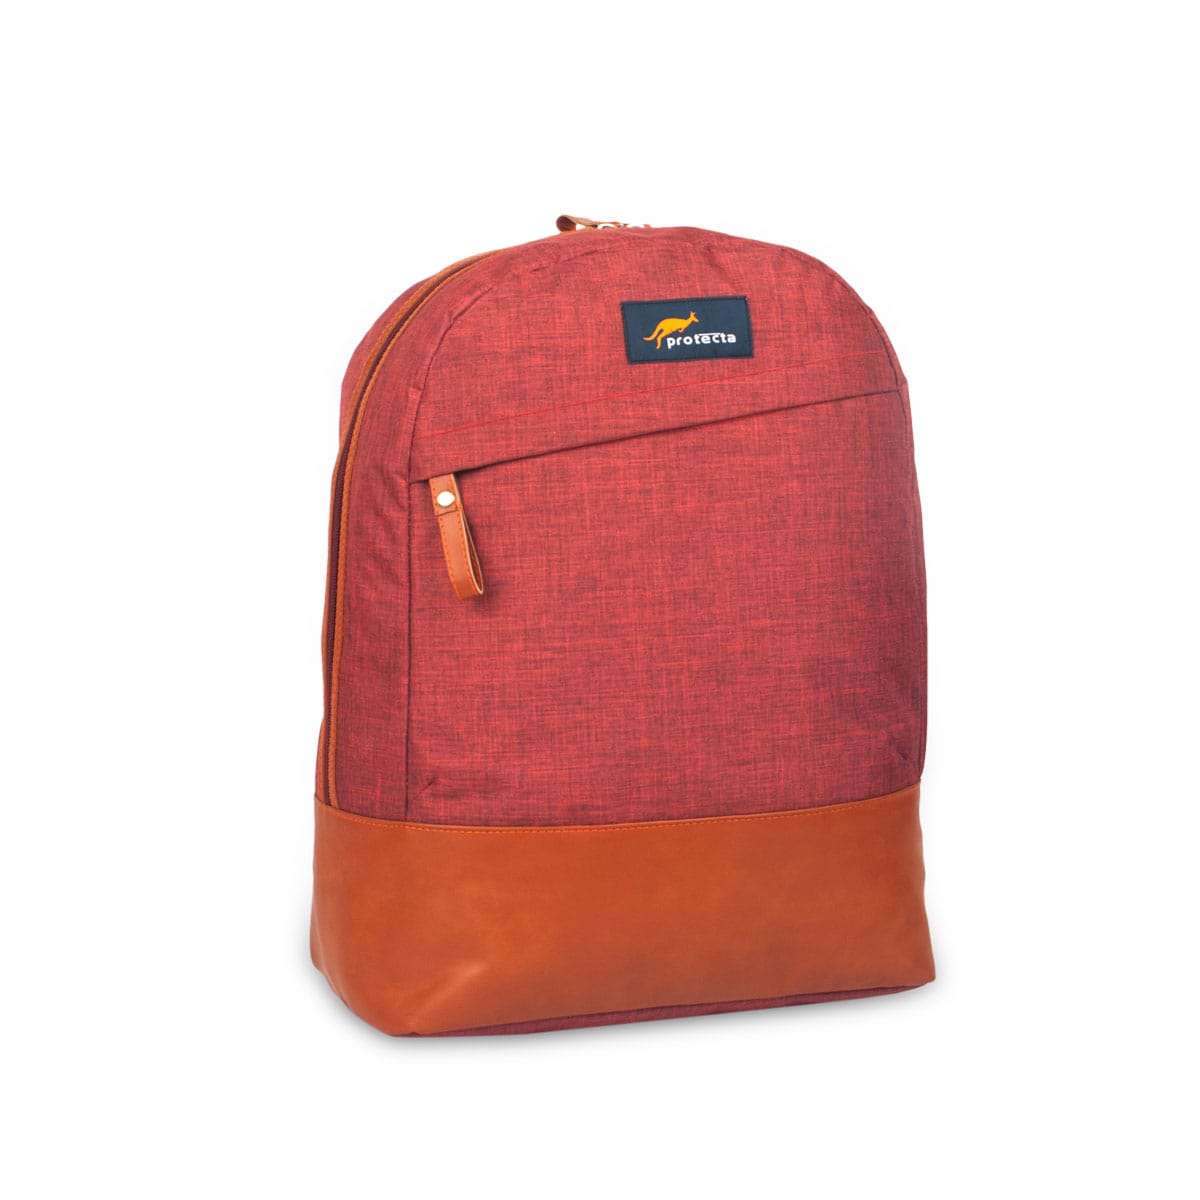 Tan-Rust-Red, Protecta Private Access Casual Backpack-1